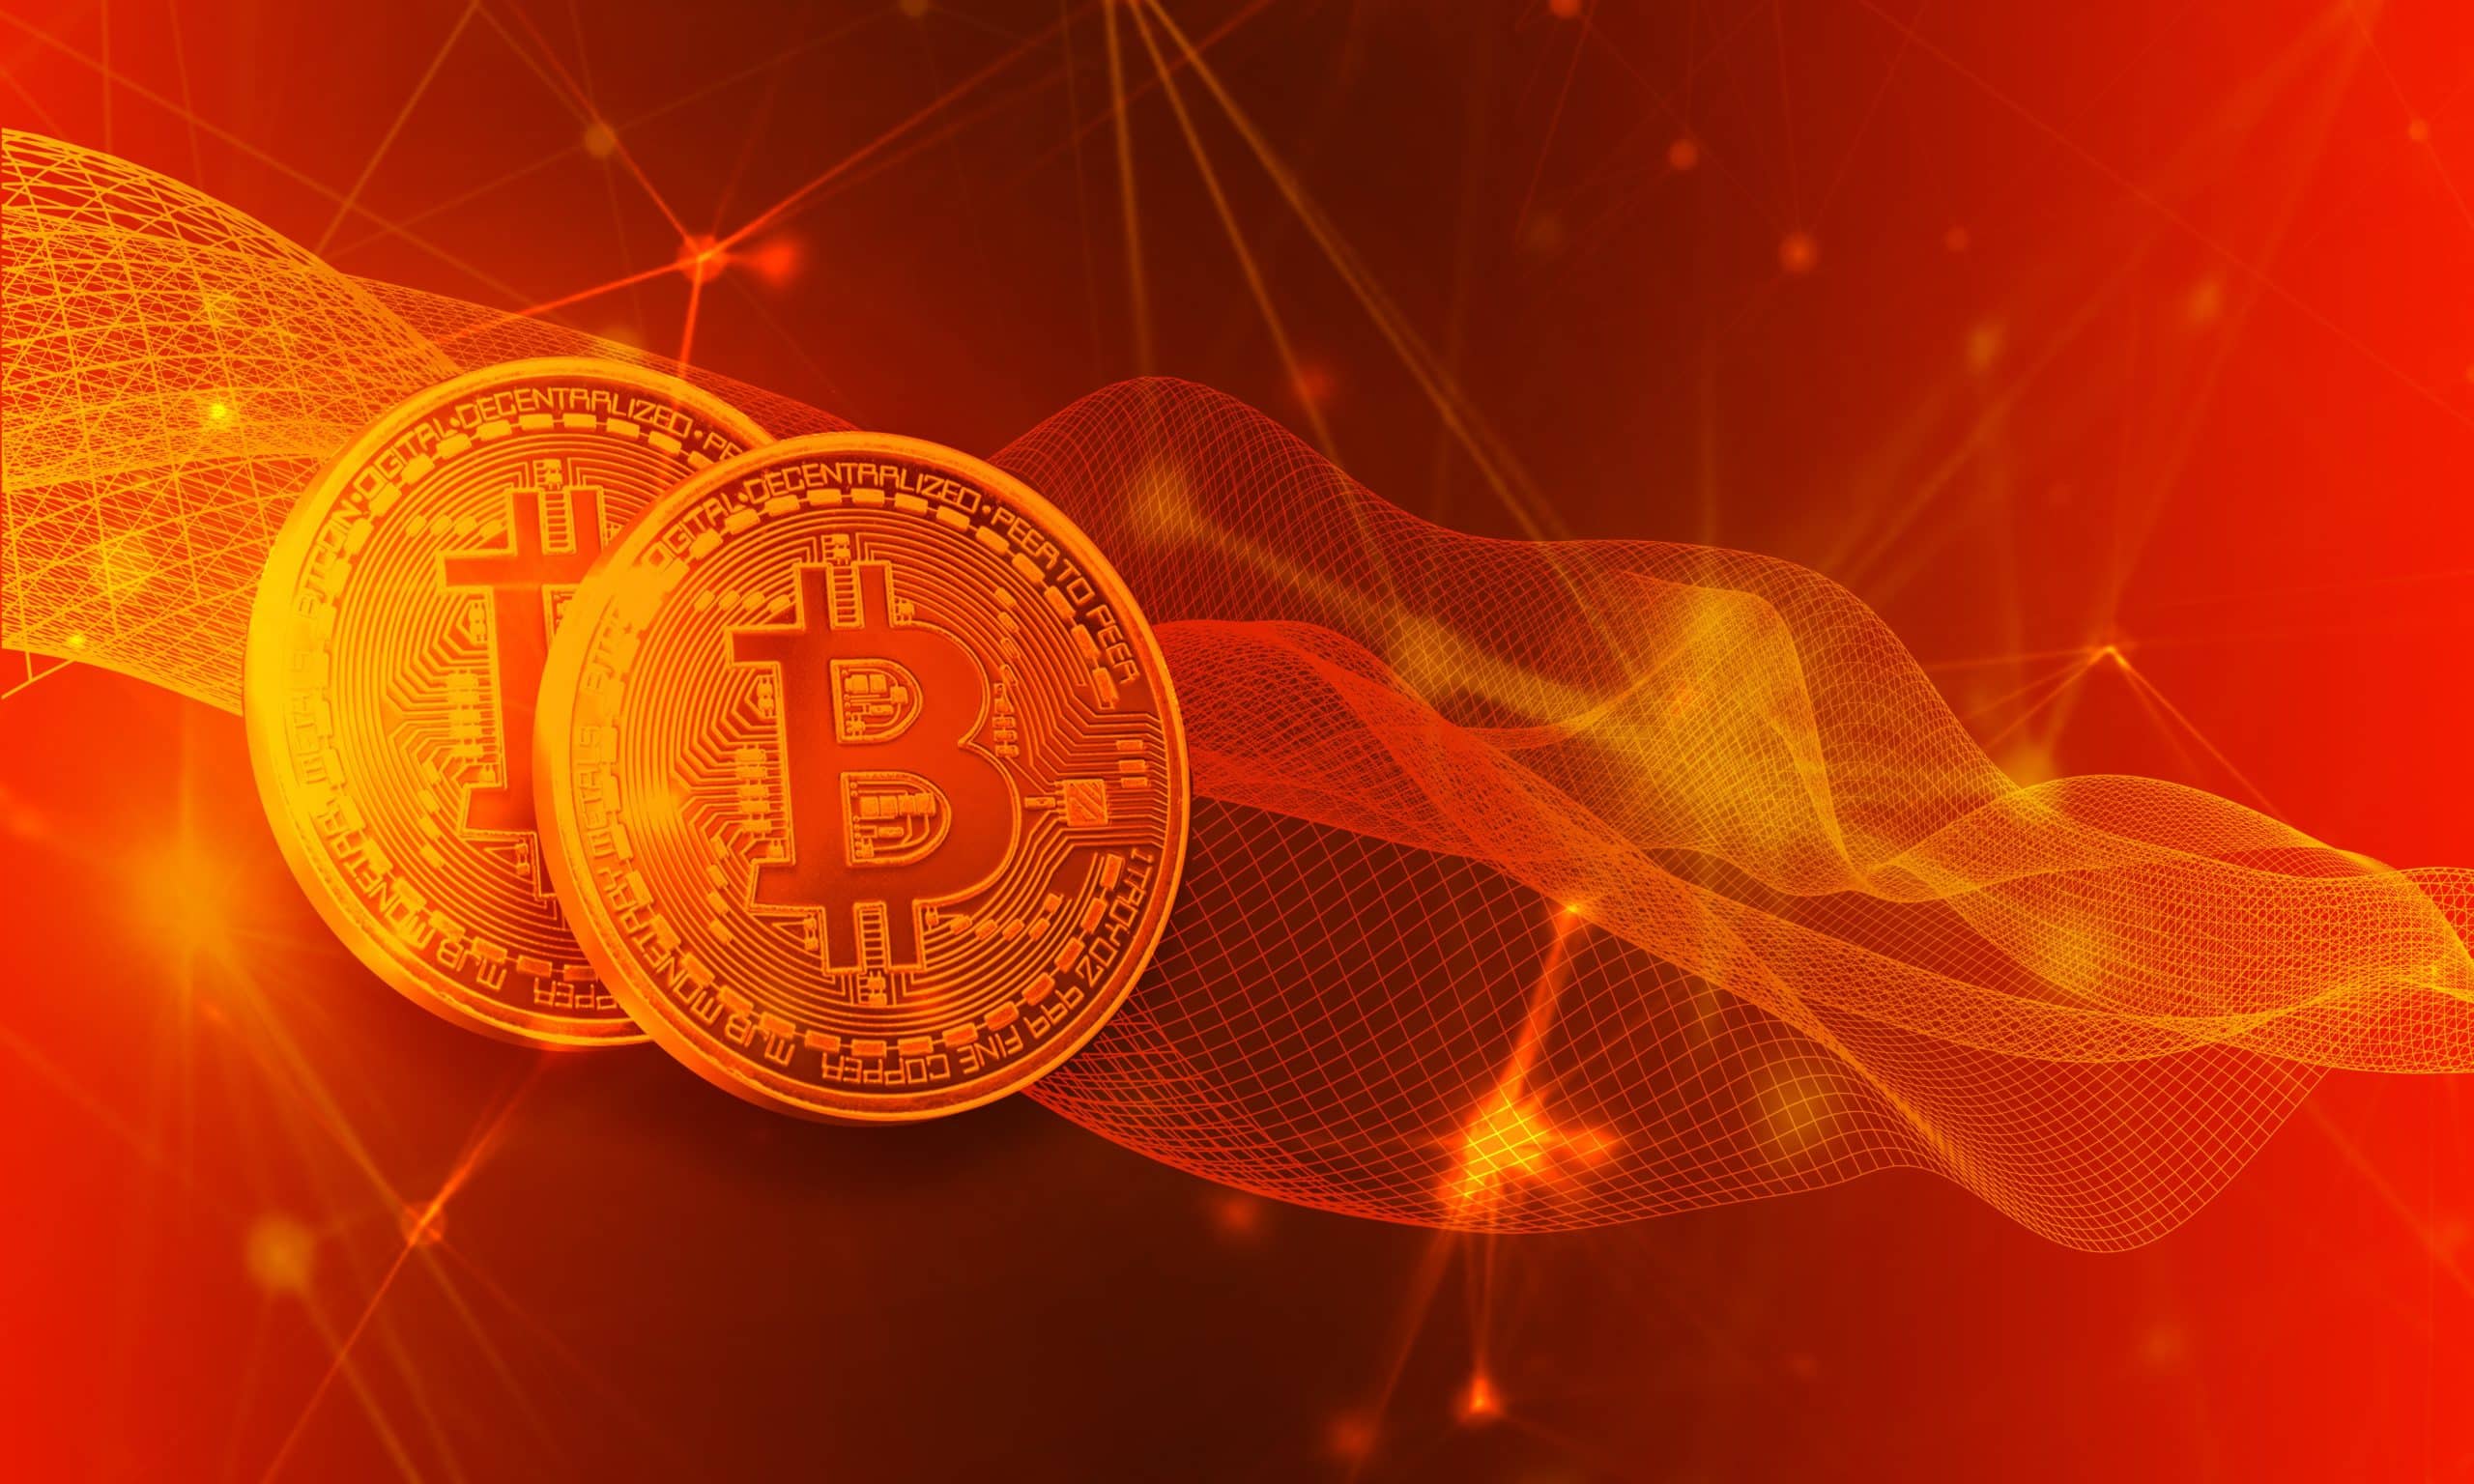 MicroStrategy Q2 Earnings: Anticipating More Bitcoin Acquisitions – Insights on Bitcoin Holdings and Forecasts Awaited